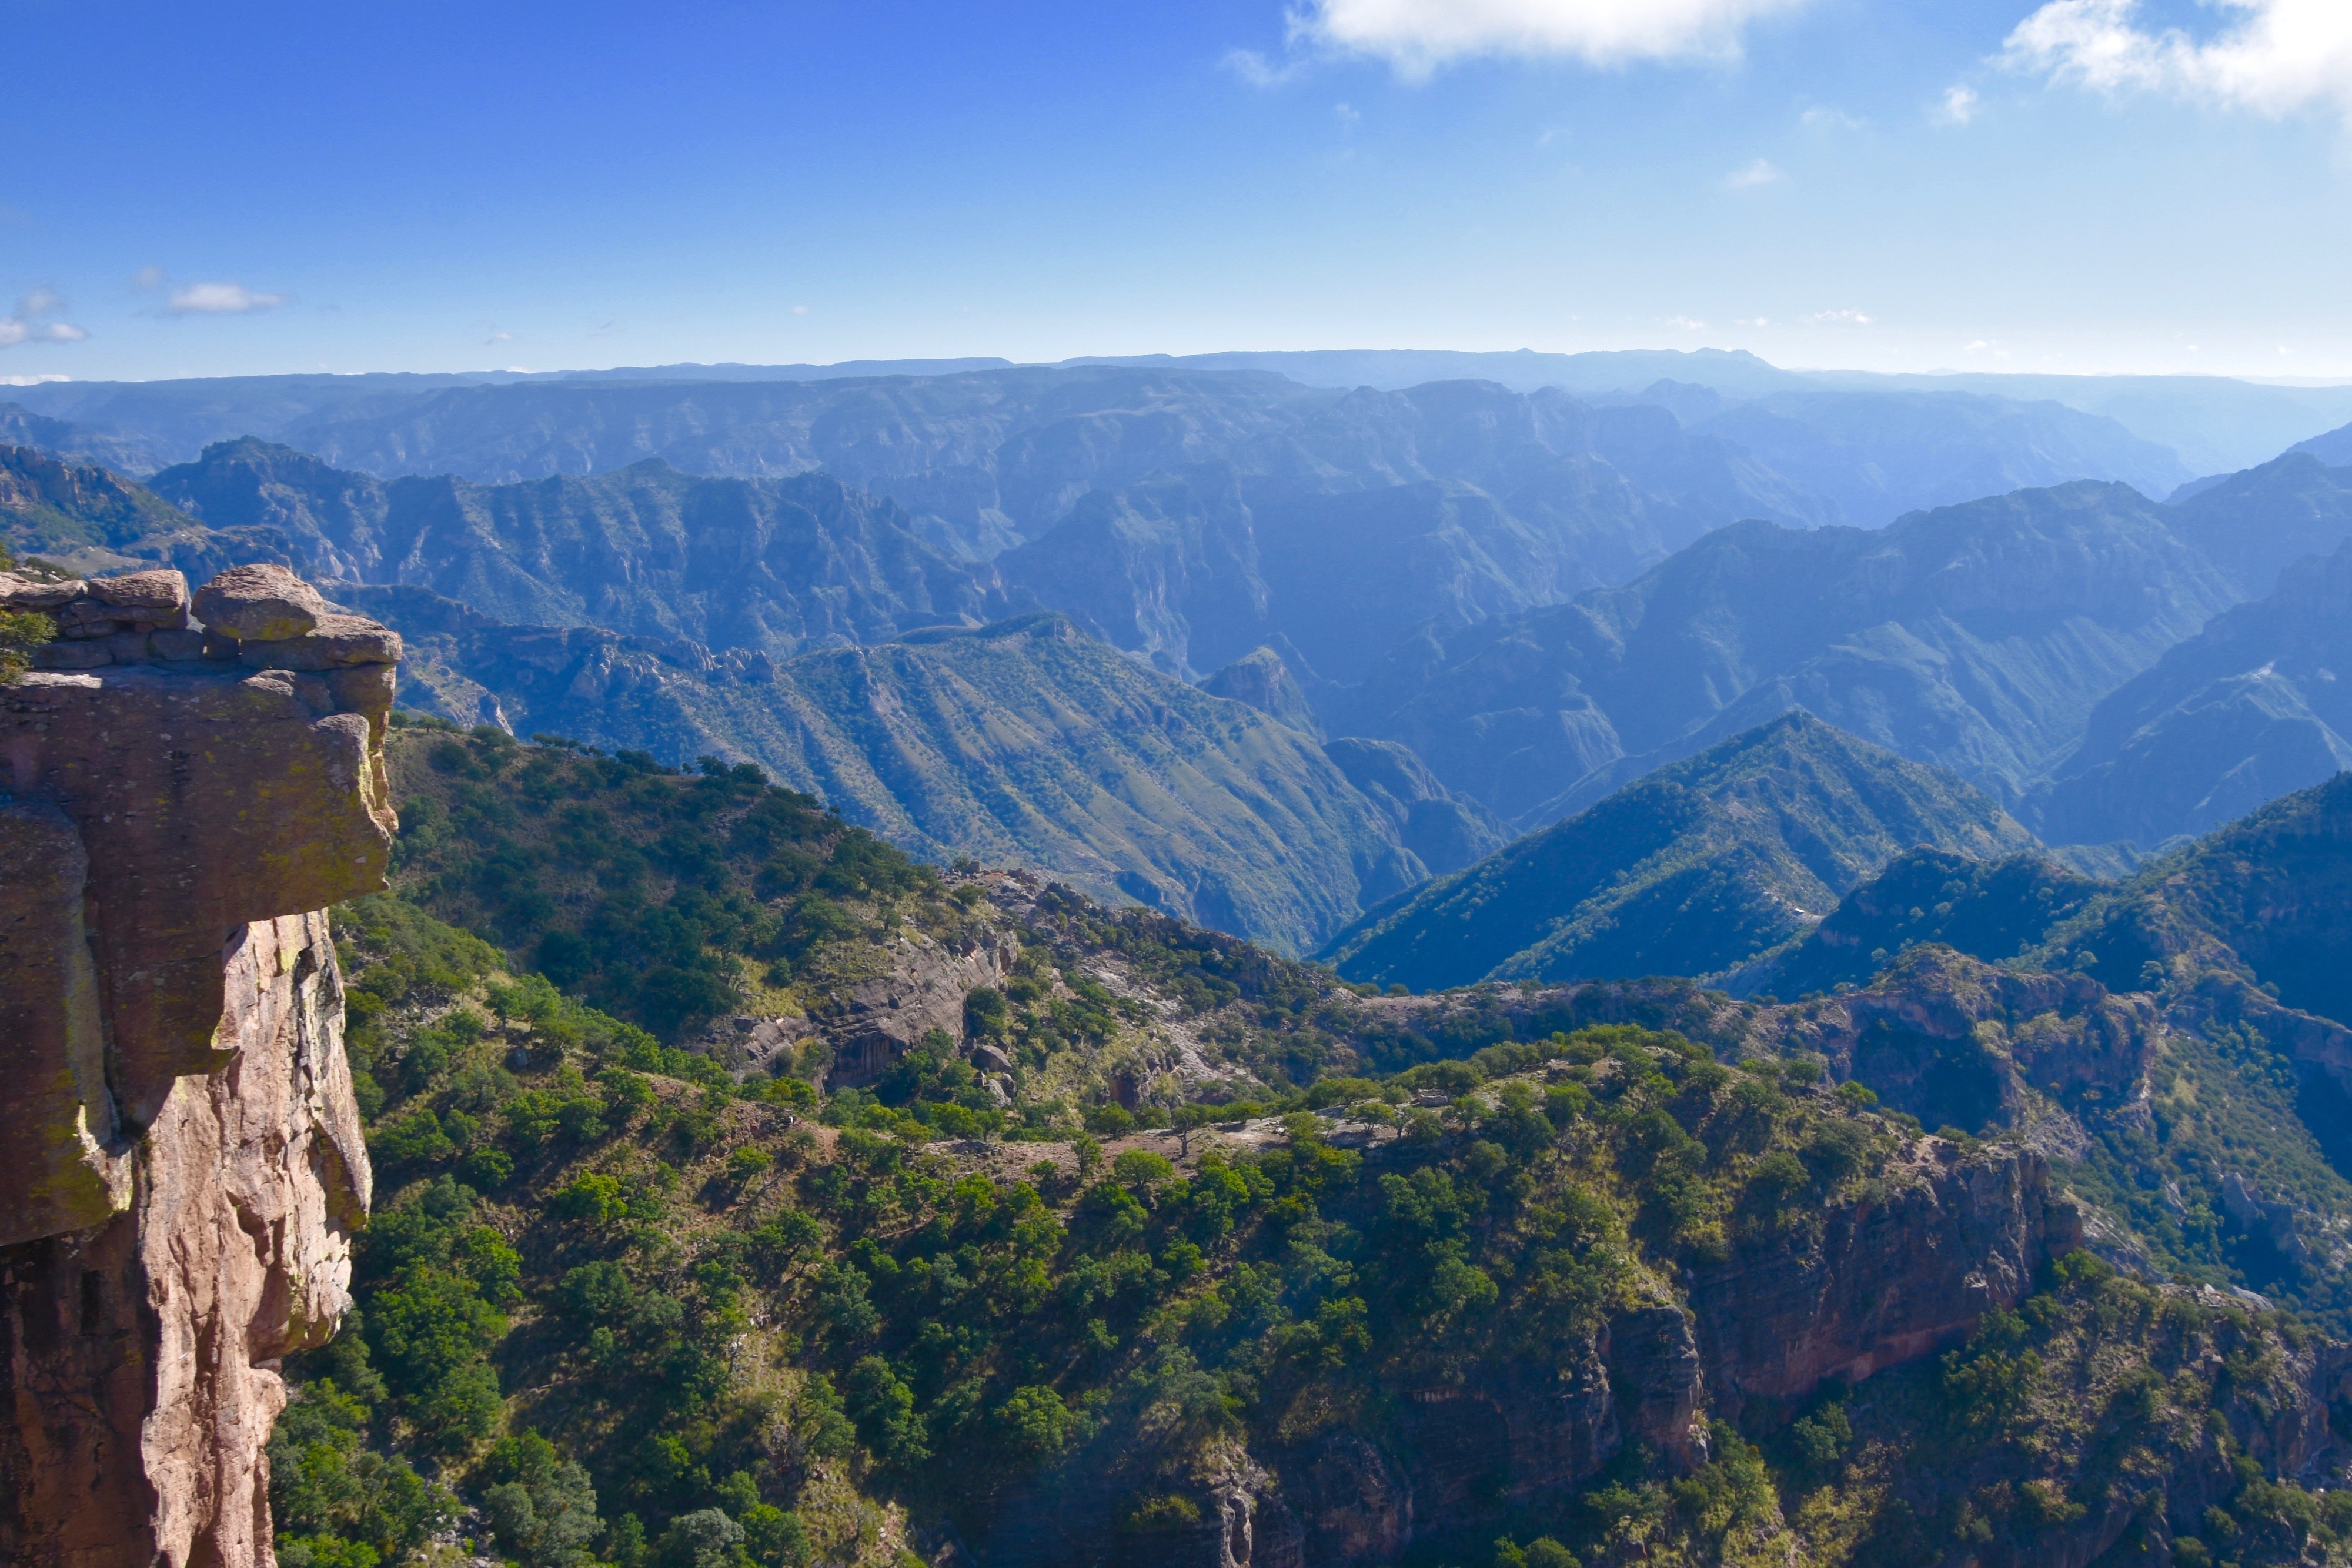 View from Overhang, Copper Canyon